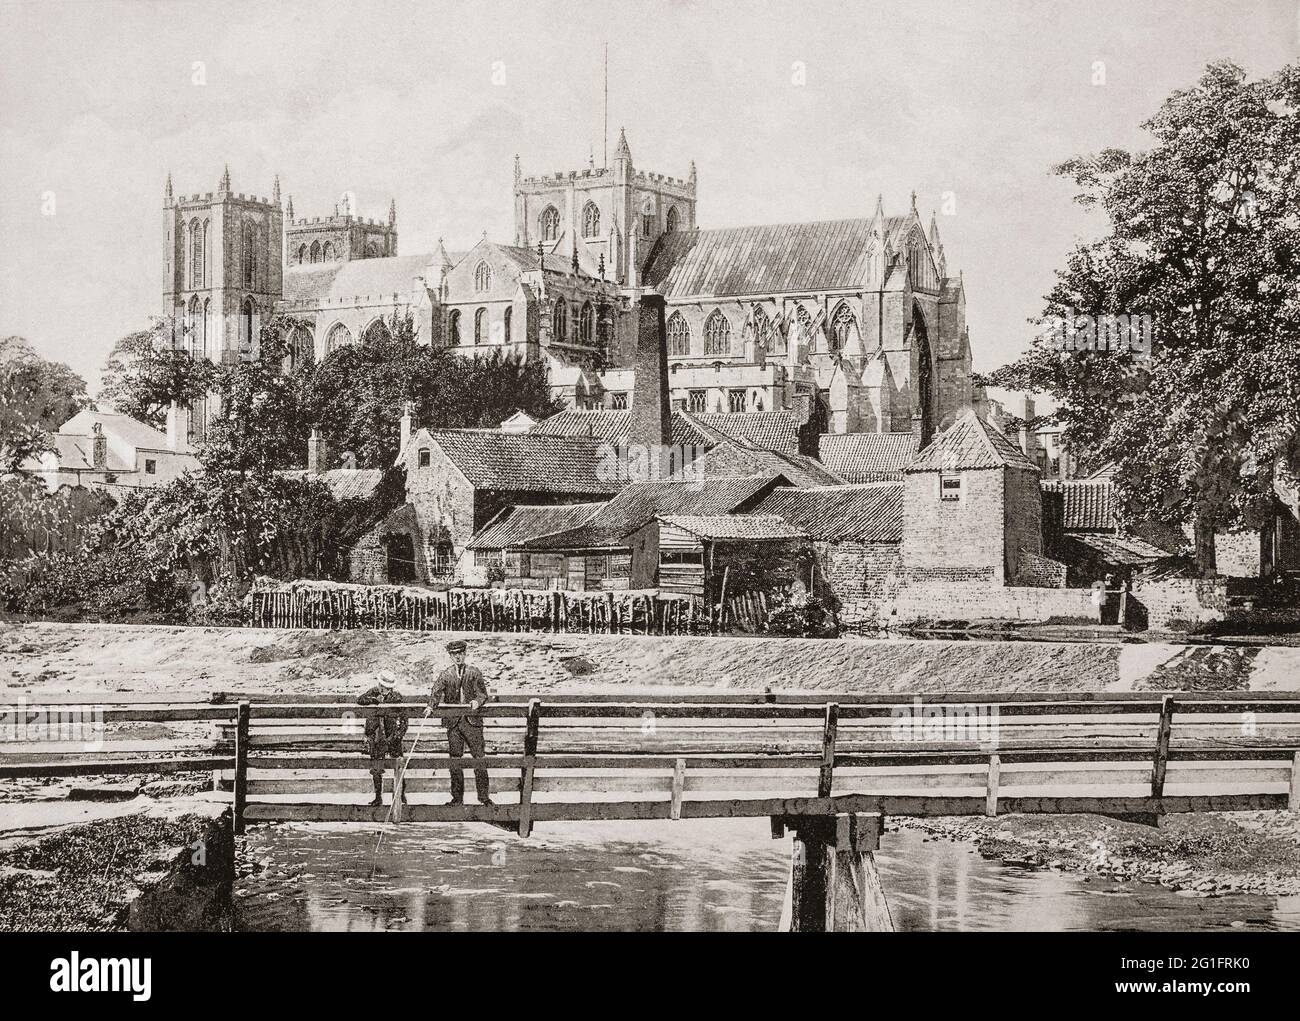 A late 19th century view of the Cathedral Church of St Peter and St Wilfrid, commonly known as Ripon Cathedral in the North Yorkshire city of Ripon from across the River Skell. It was founded as a monastery by Scottish monks in the 660s, and  became collegiate in the tenth century, and acted as a mother church within the large Diocese of York for the remainder of the Middle Ages. The present church was built between the 13th and 16th centuries and became the cathedral for the Diocese of Ripon in 1836. Stock Photo